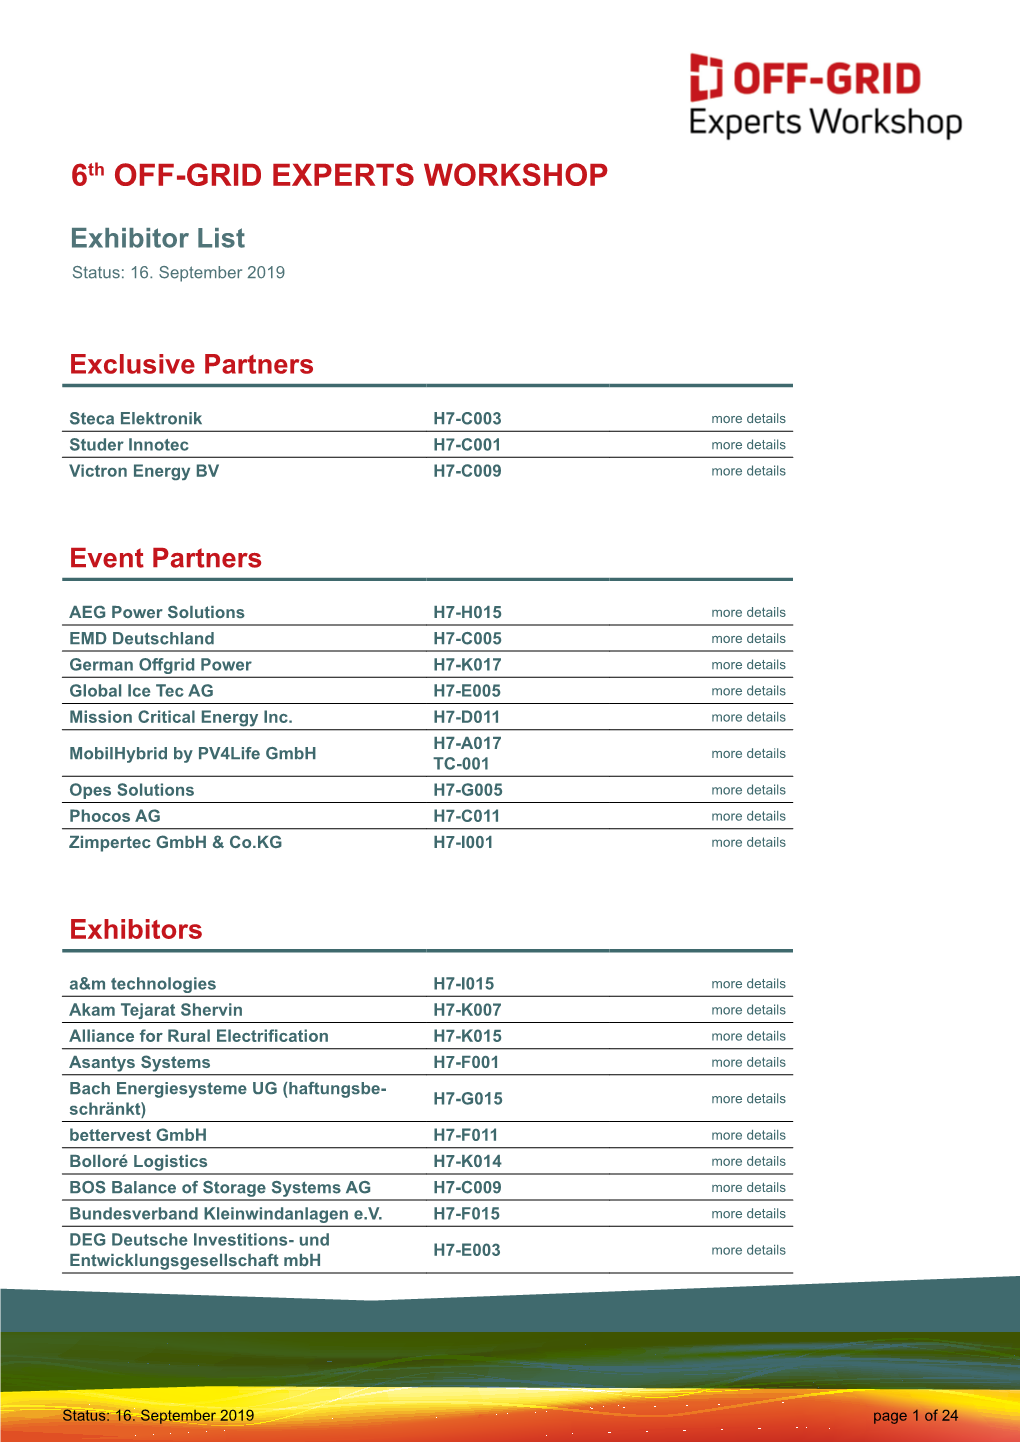 Partners and Exhibitors